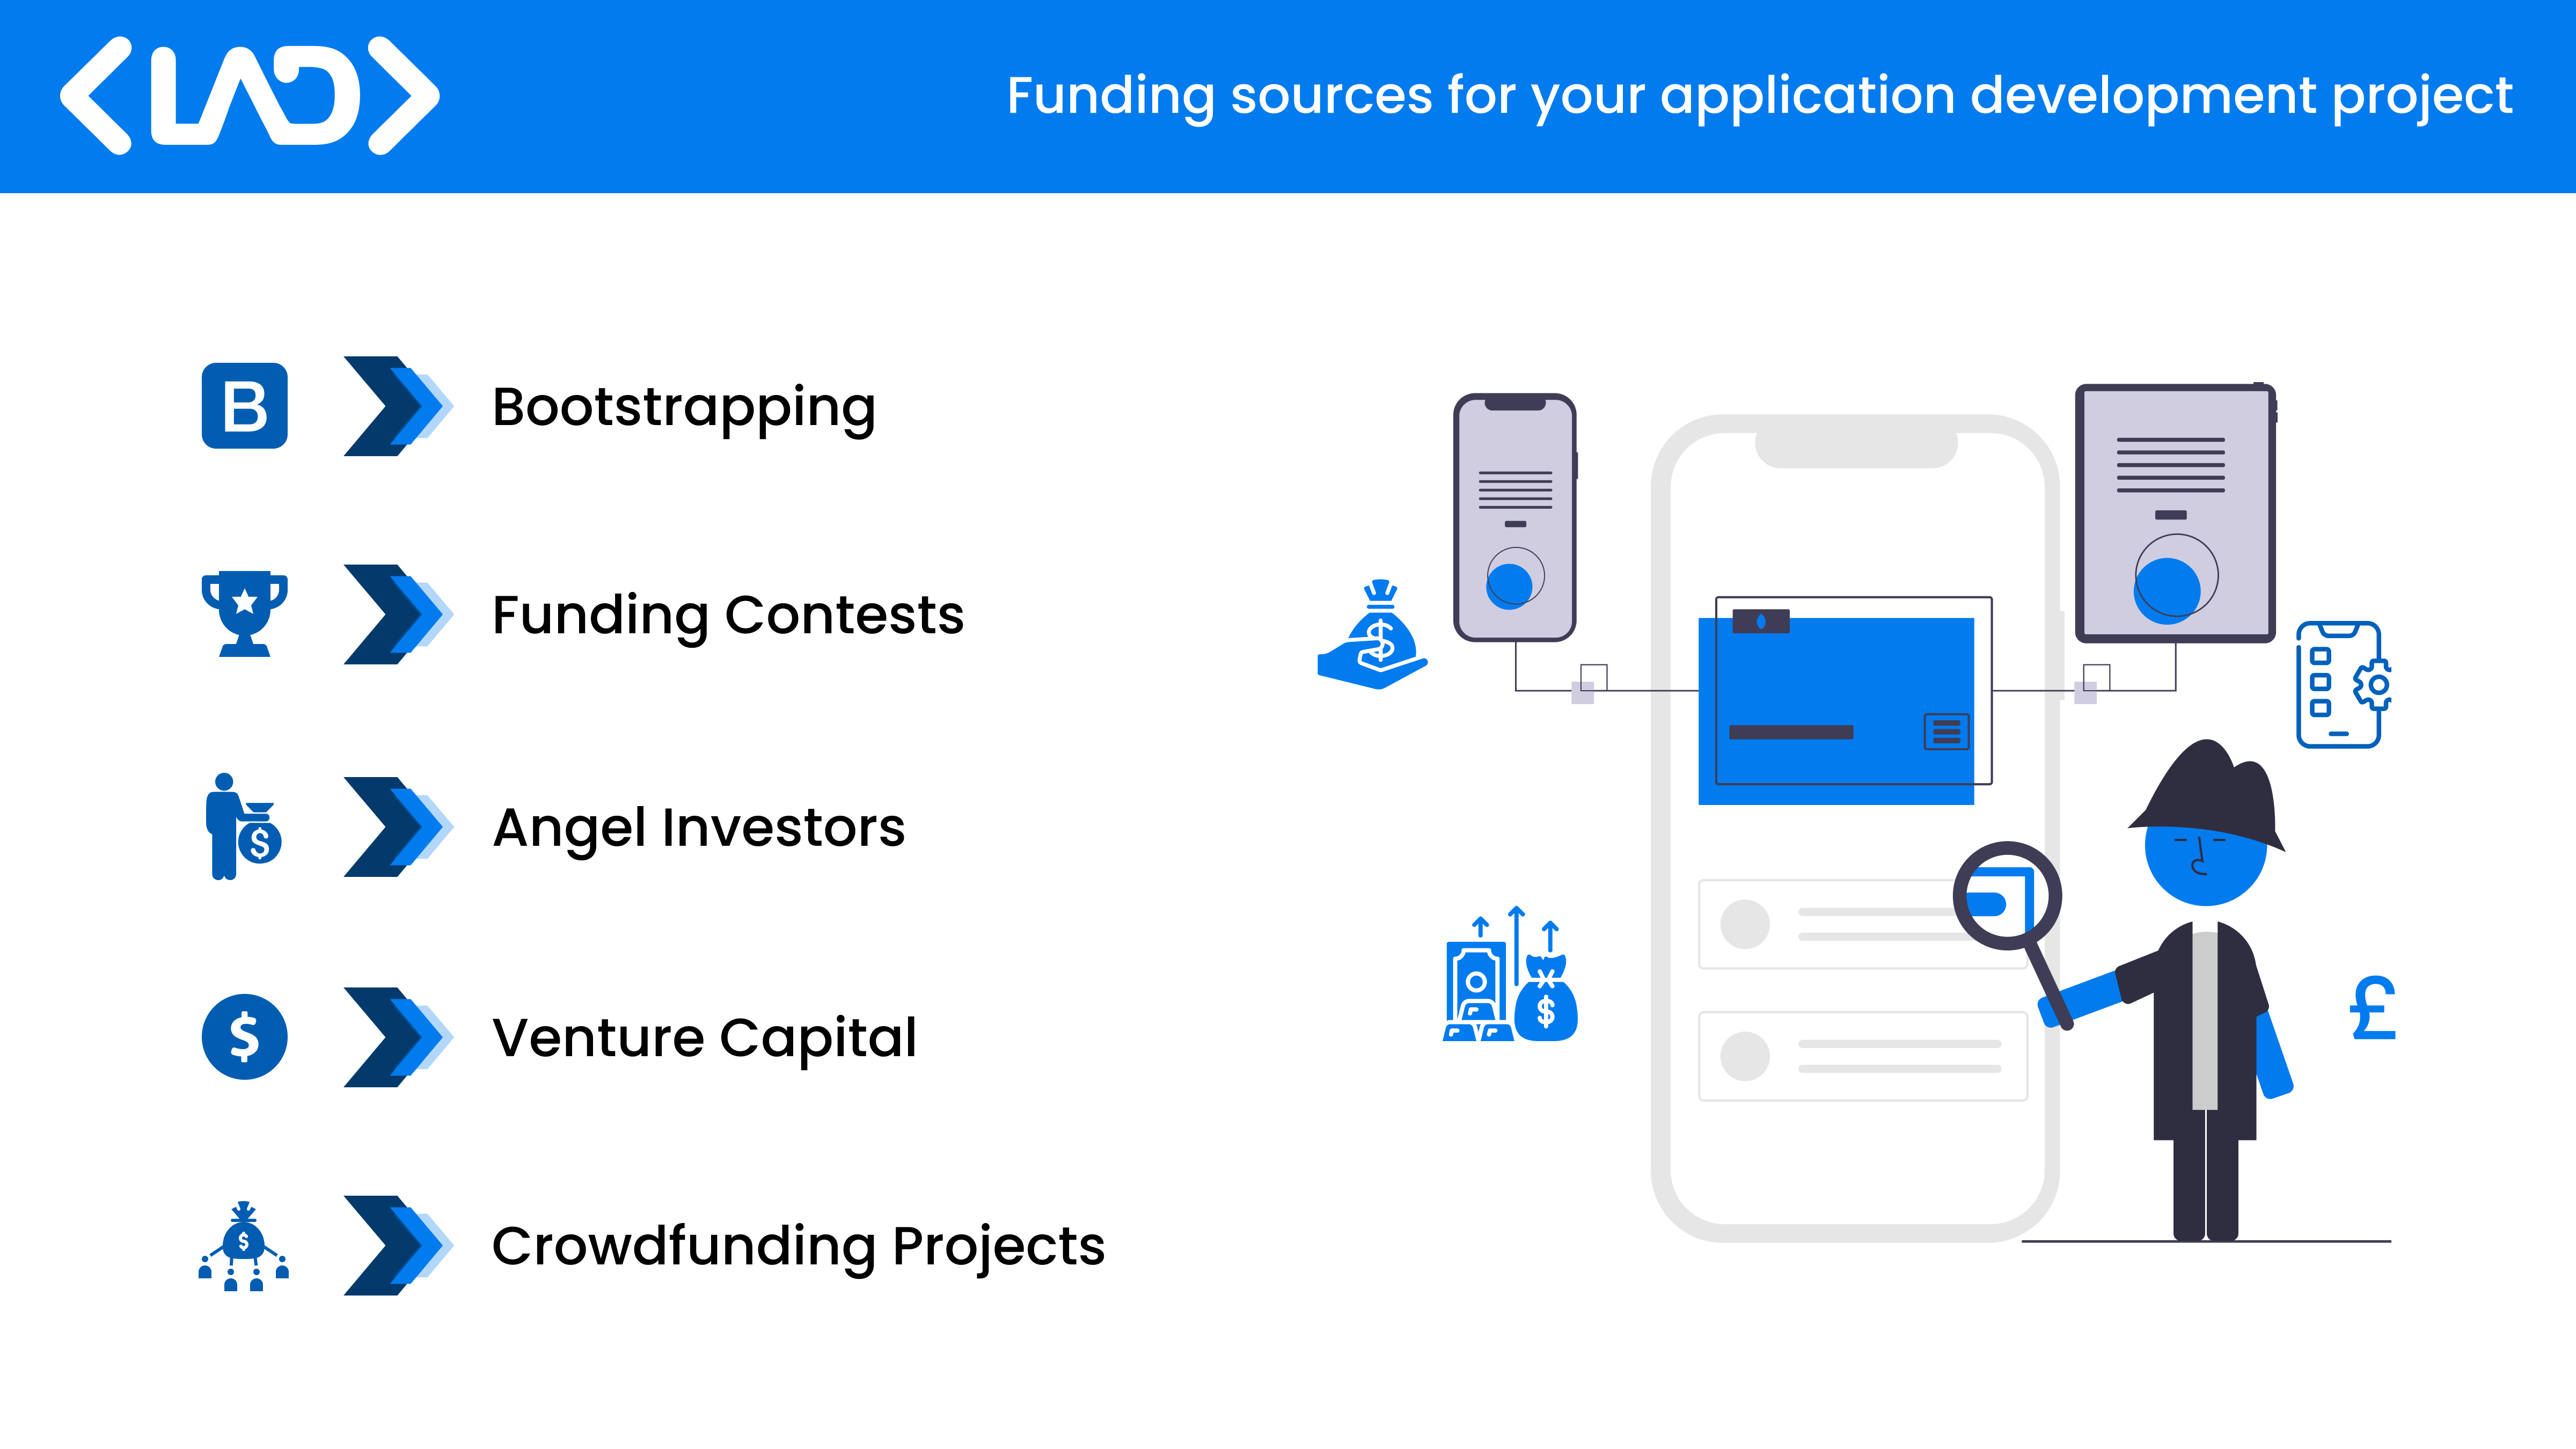 Image showing the funding sources for app development.